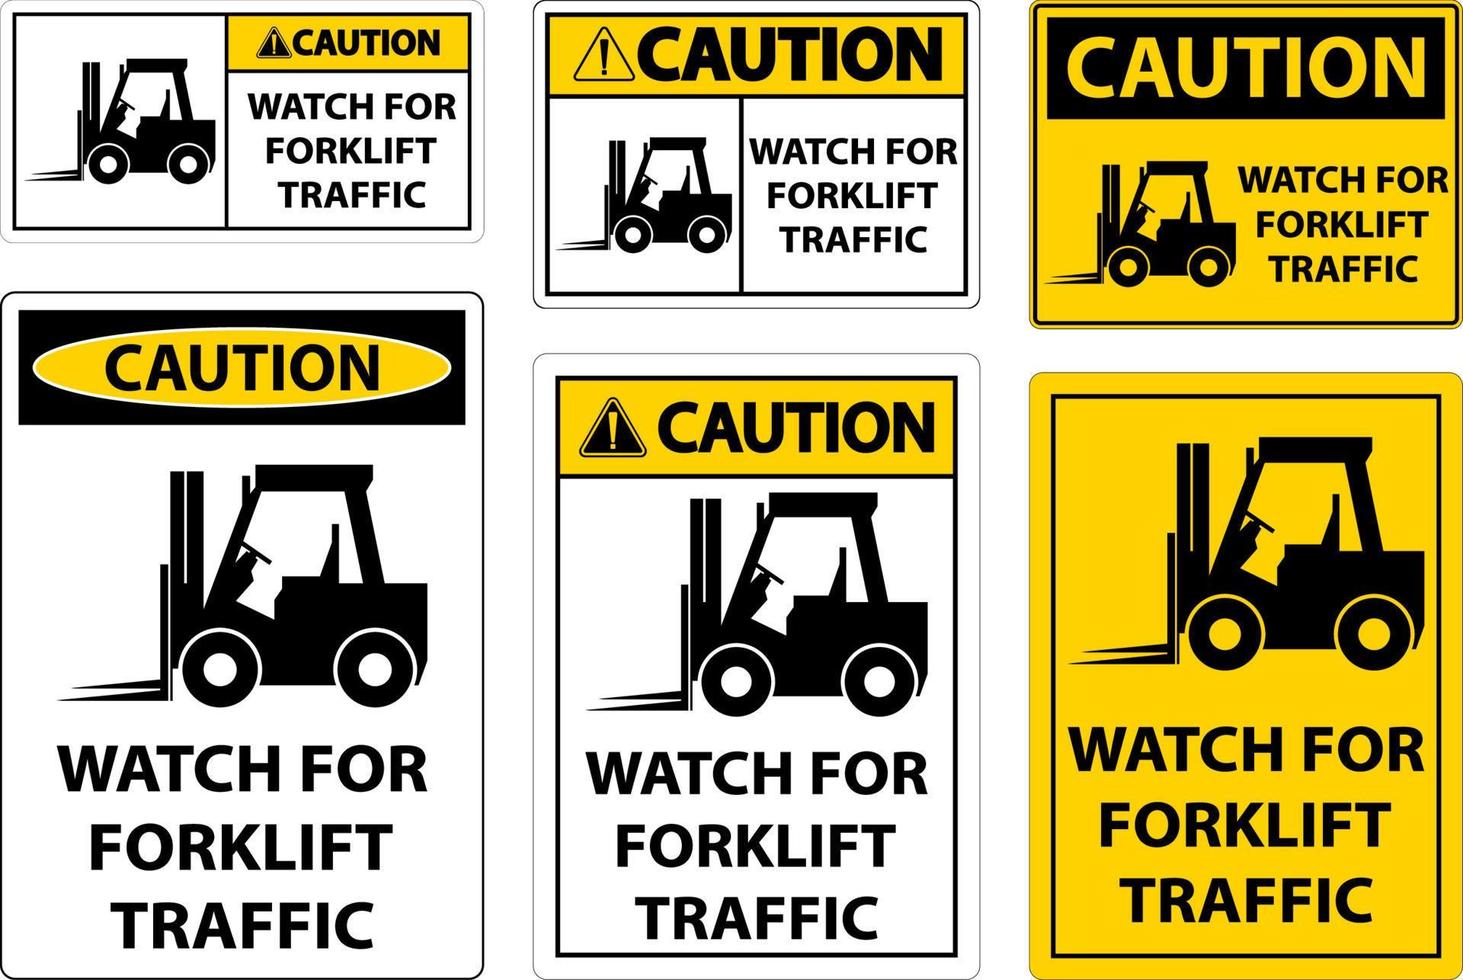 Caution 2-Way Watch For Forklift Traffic Sign On White Background vector